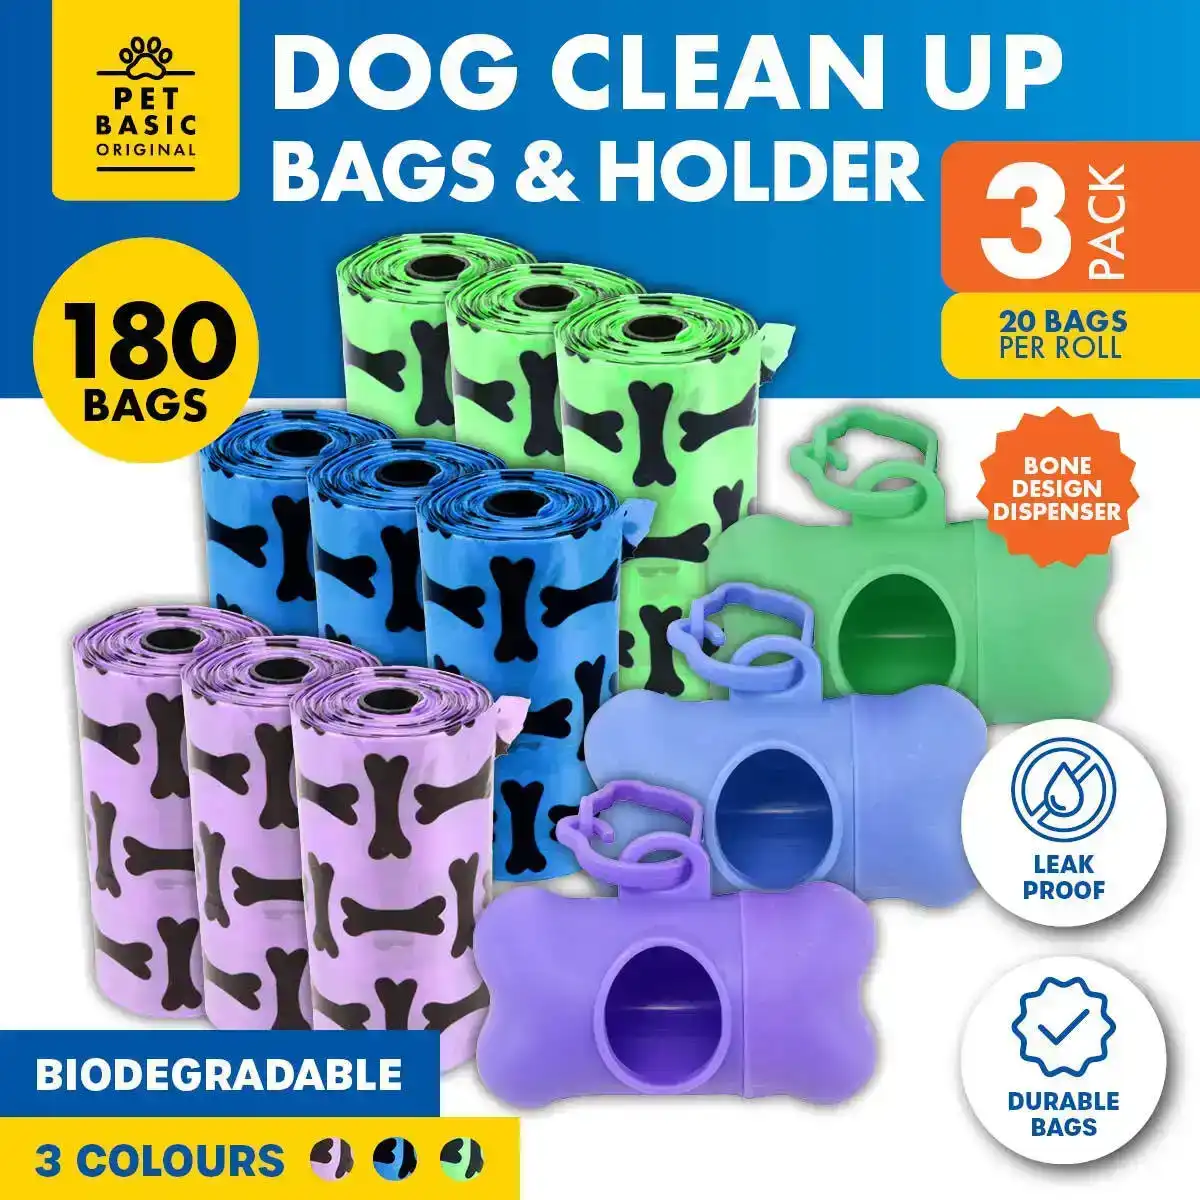 Pet Basic® 180PCE Dog Waste Clean Up Bags & Holders Coloured Strong Leak Proof